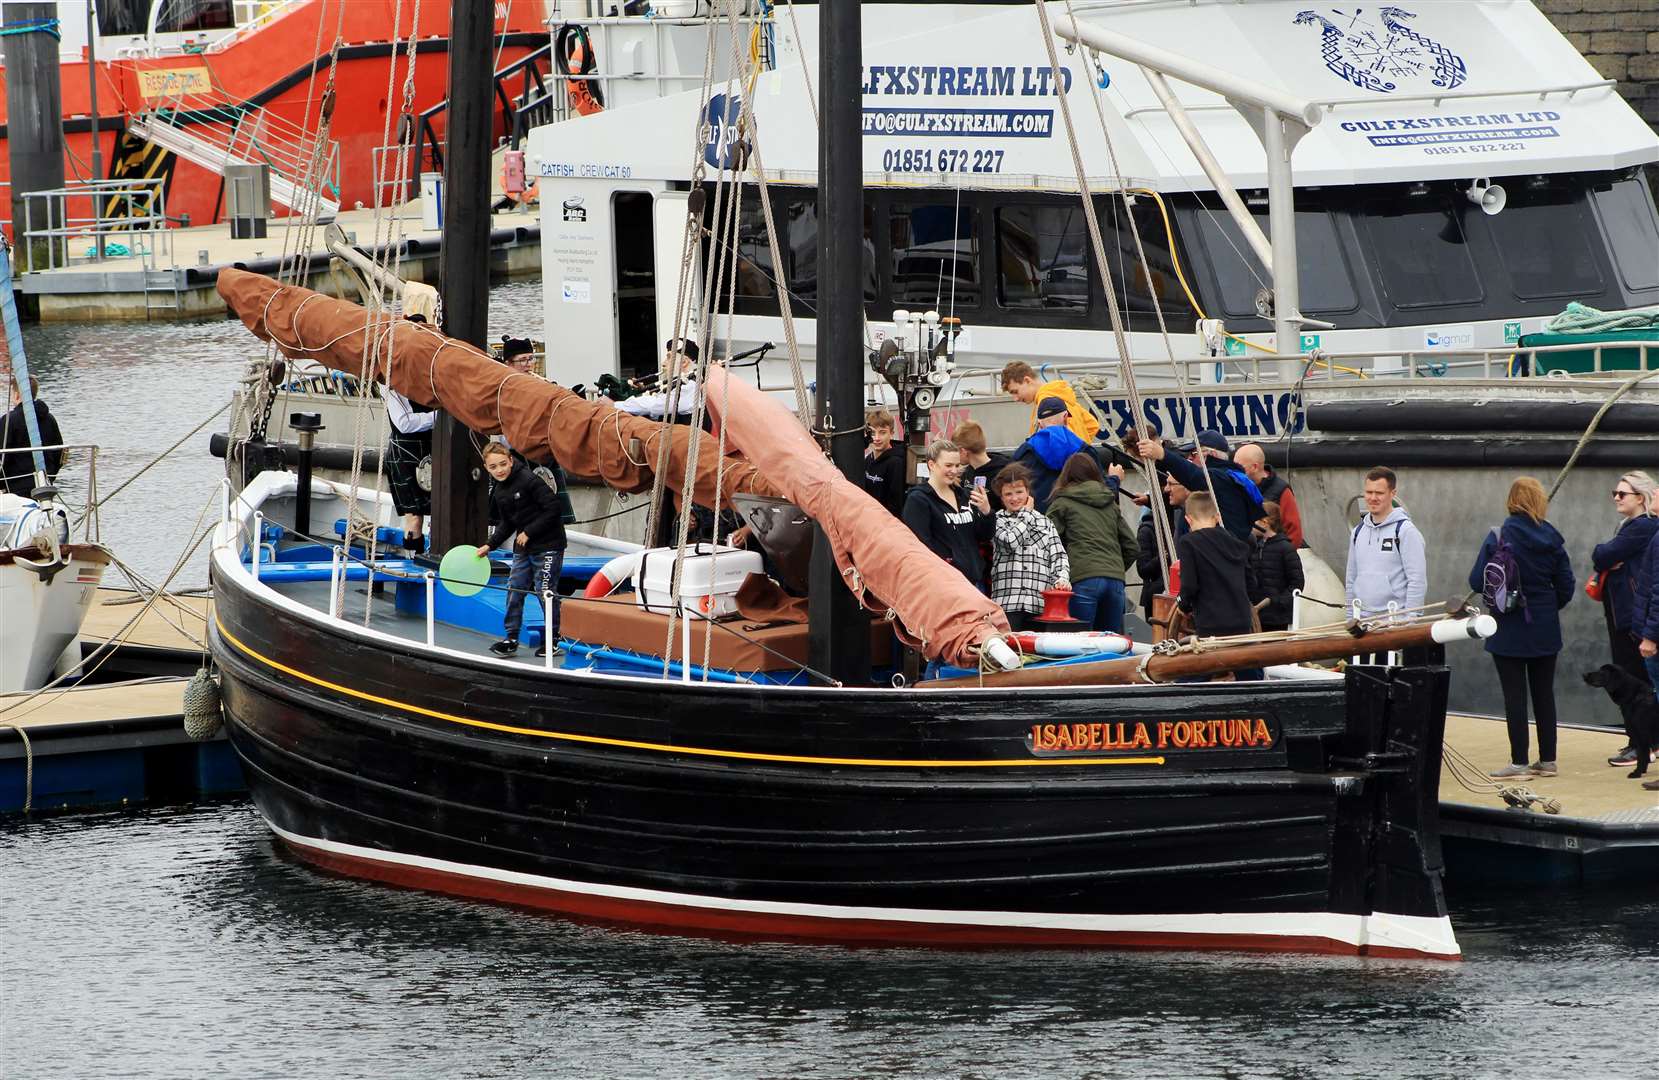 The Wick Society's historic boat Isabella Fortuna was a popular attraction in the marina. Picture: Alan Hendry